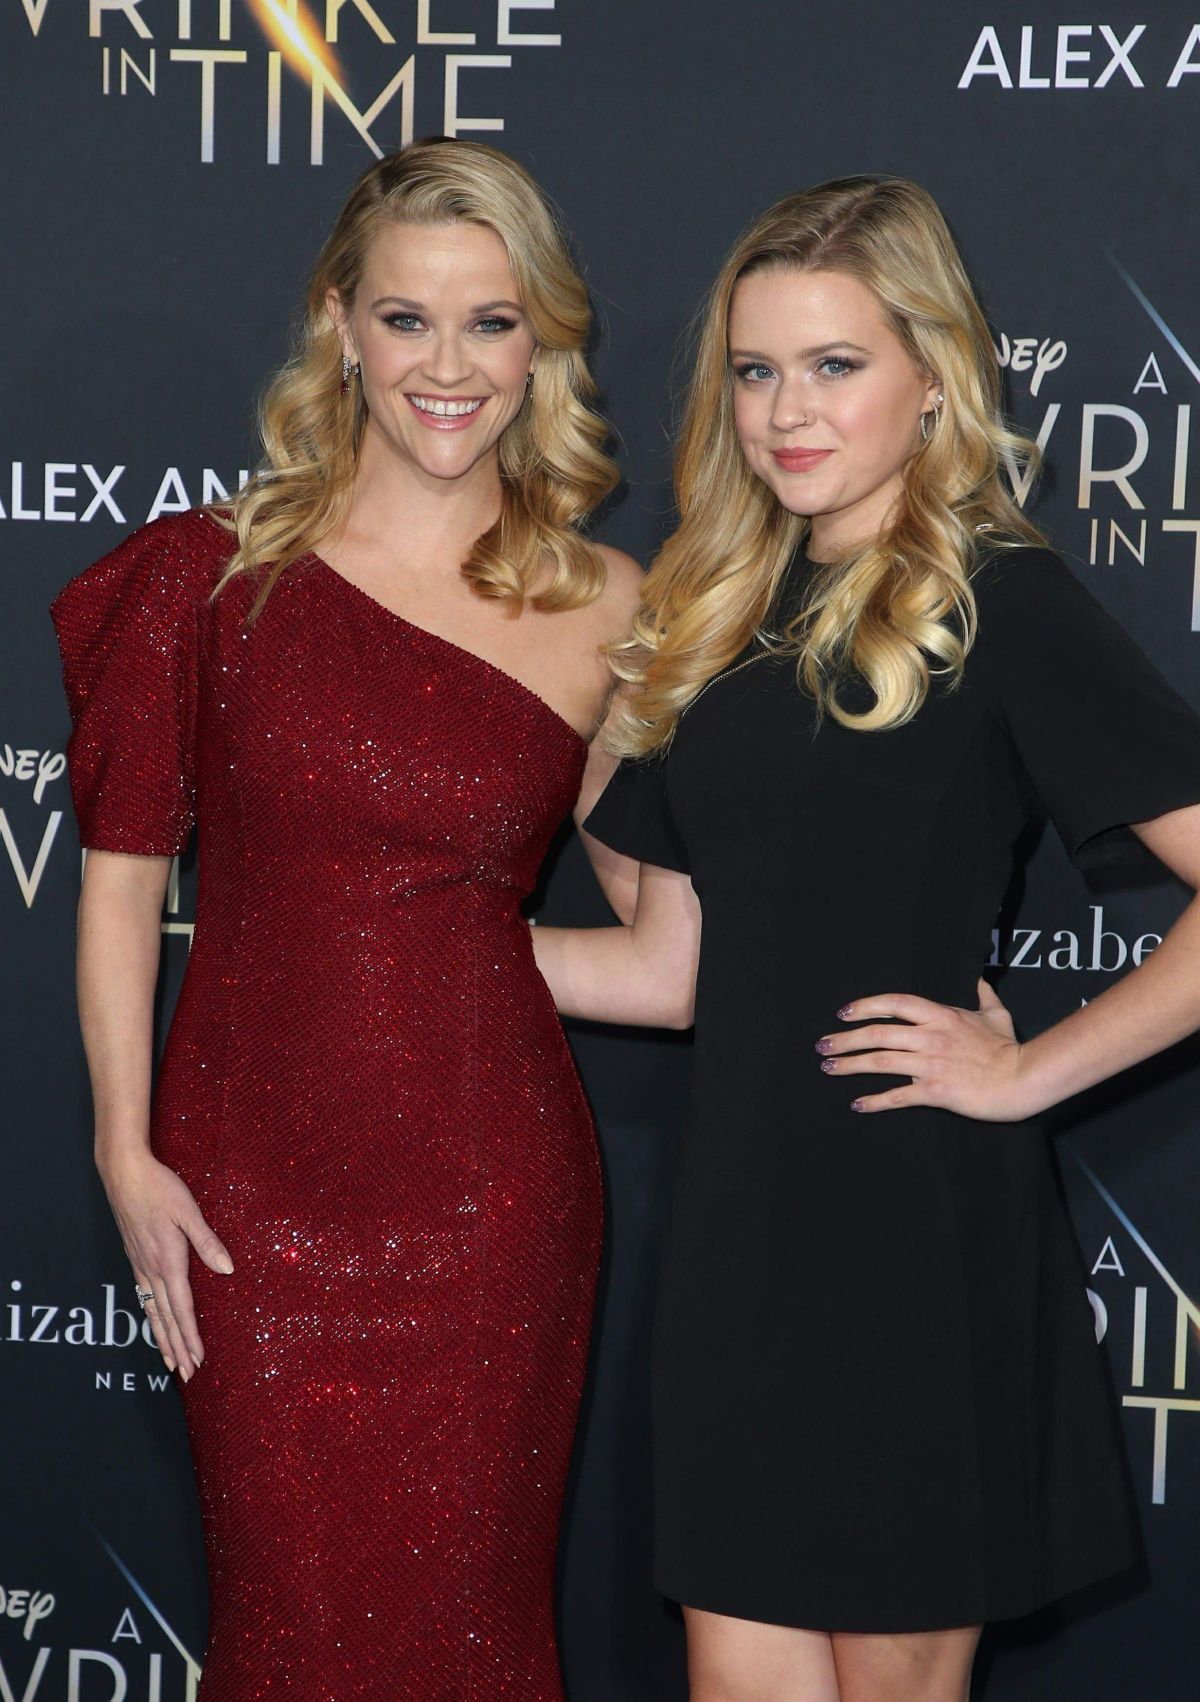 Reese Witherspoon And Ava Phillippe At A Wrinkle In Time Premiere In Los Angeles 02 26 2018